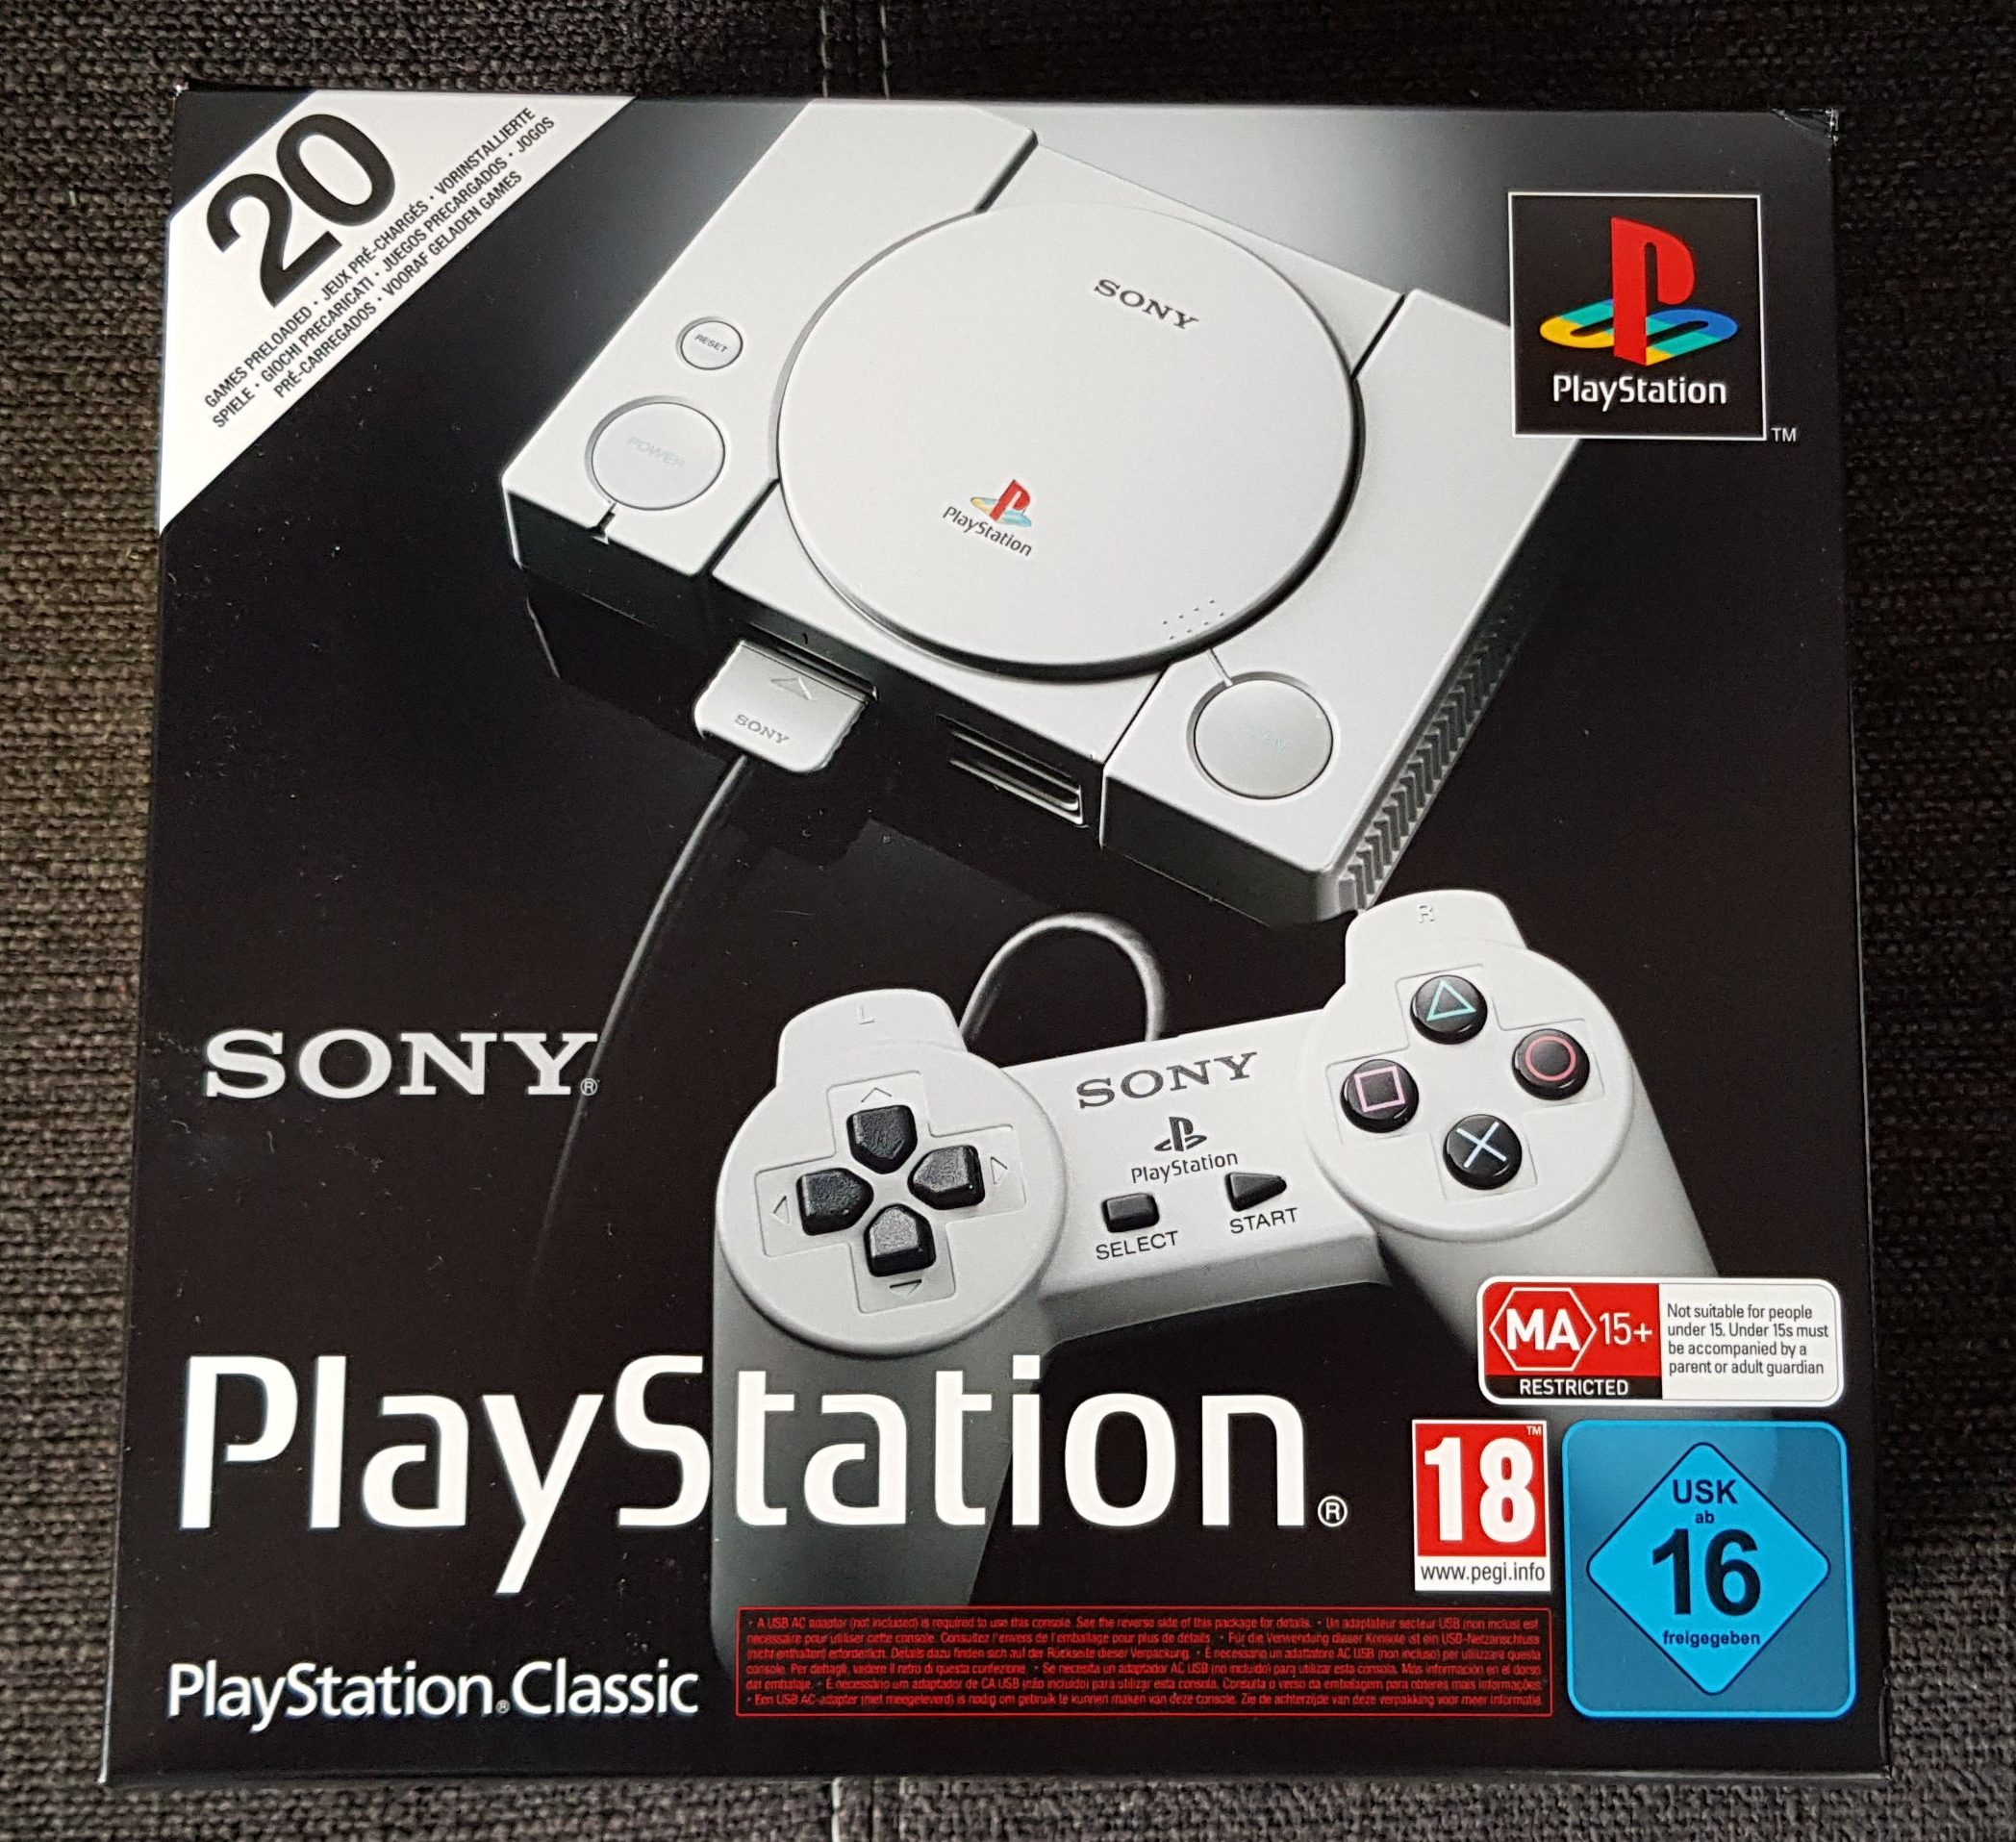 What Games Are in the PlayStation Classic?